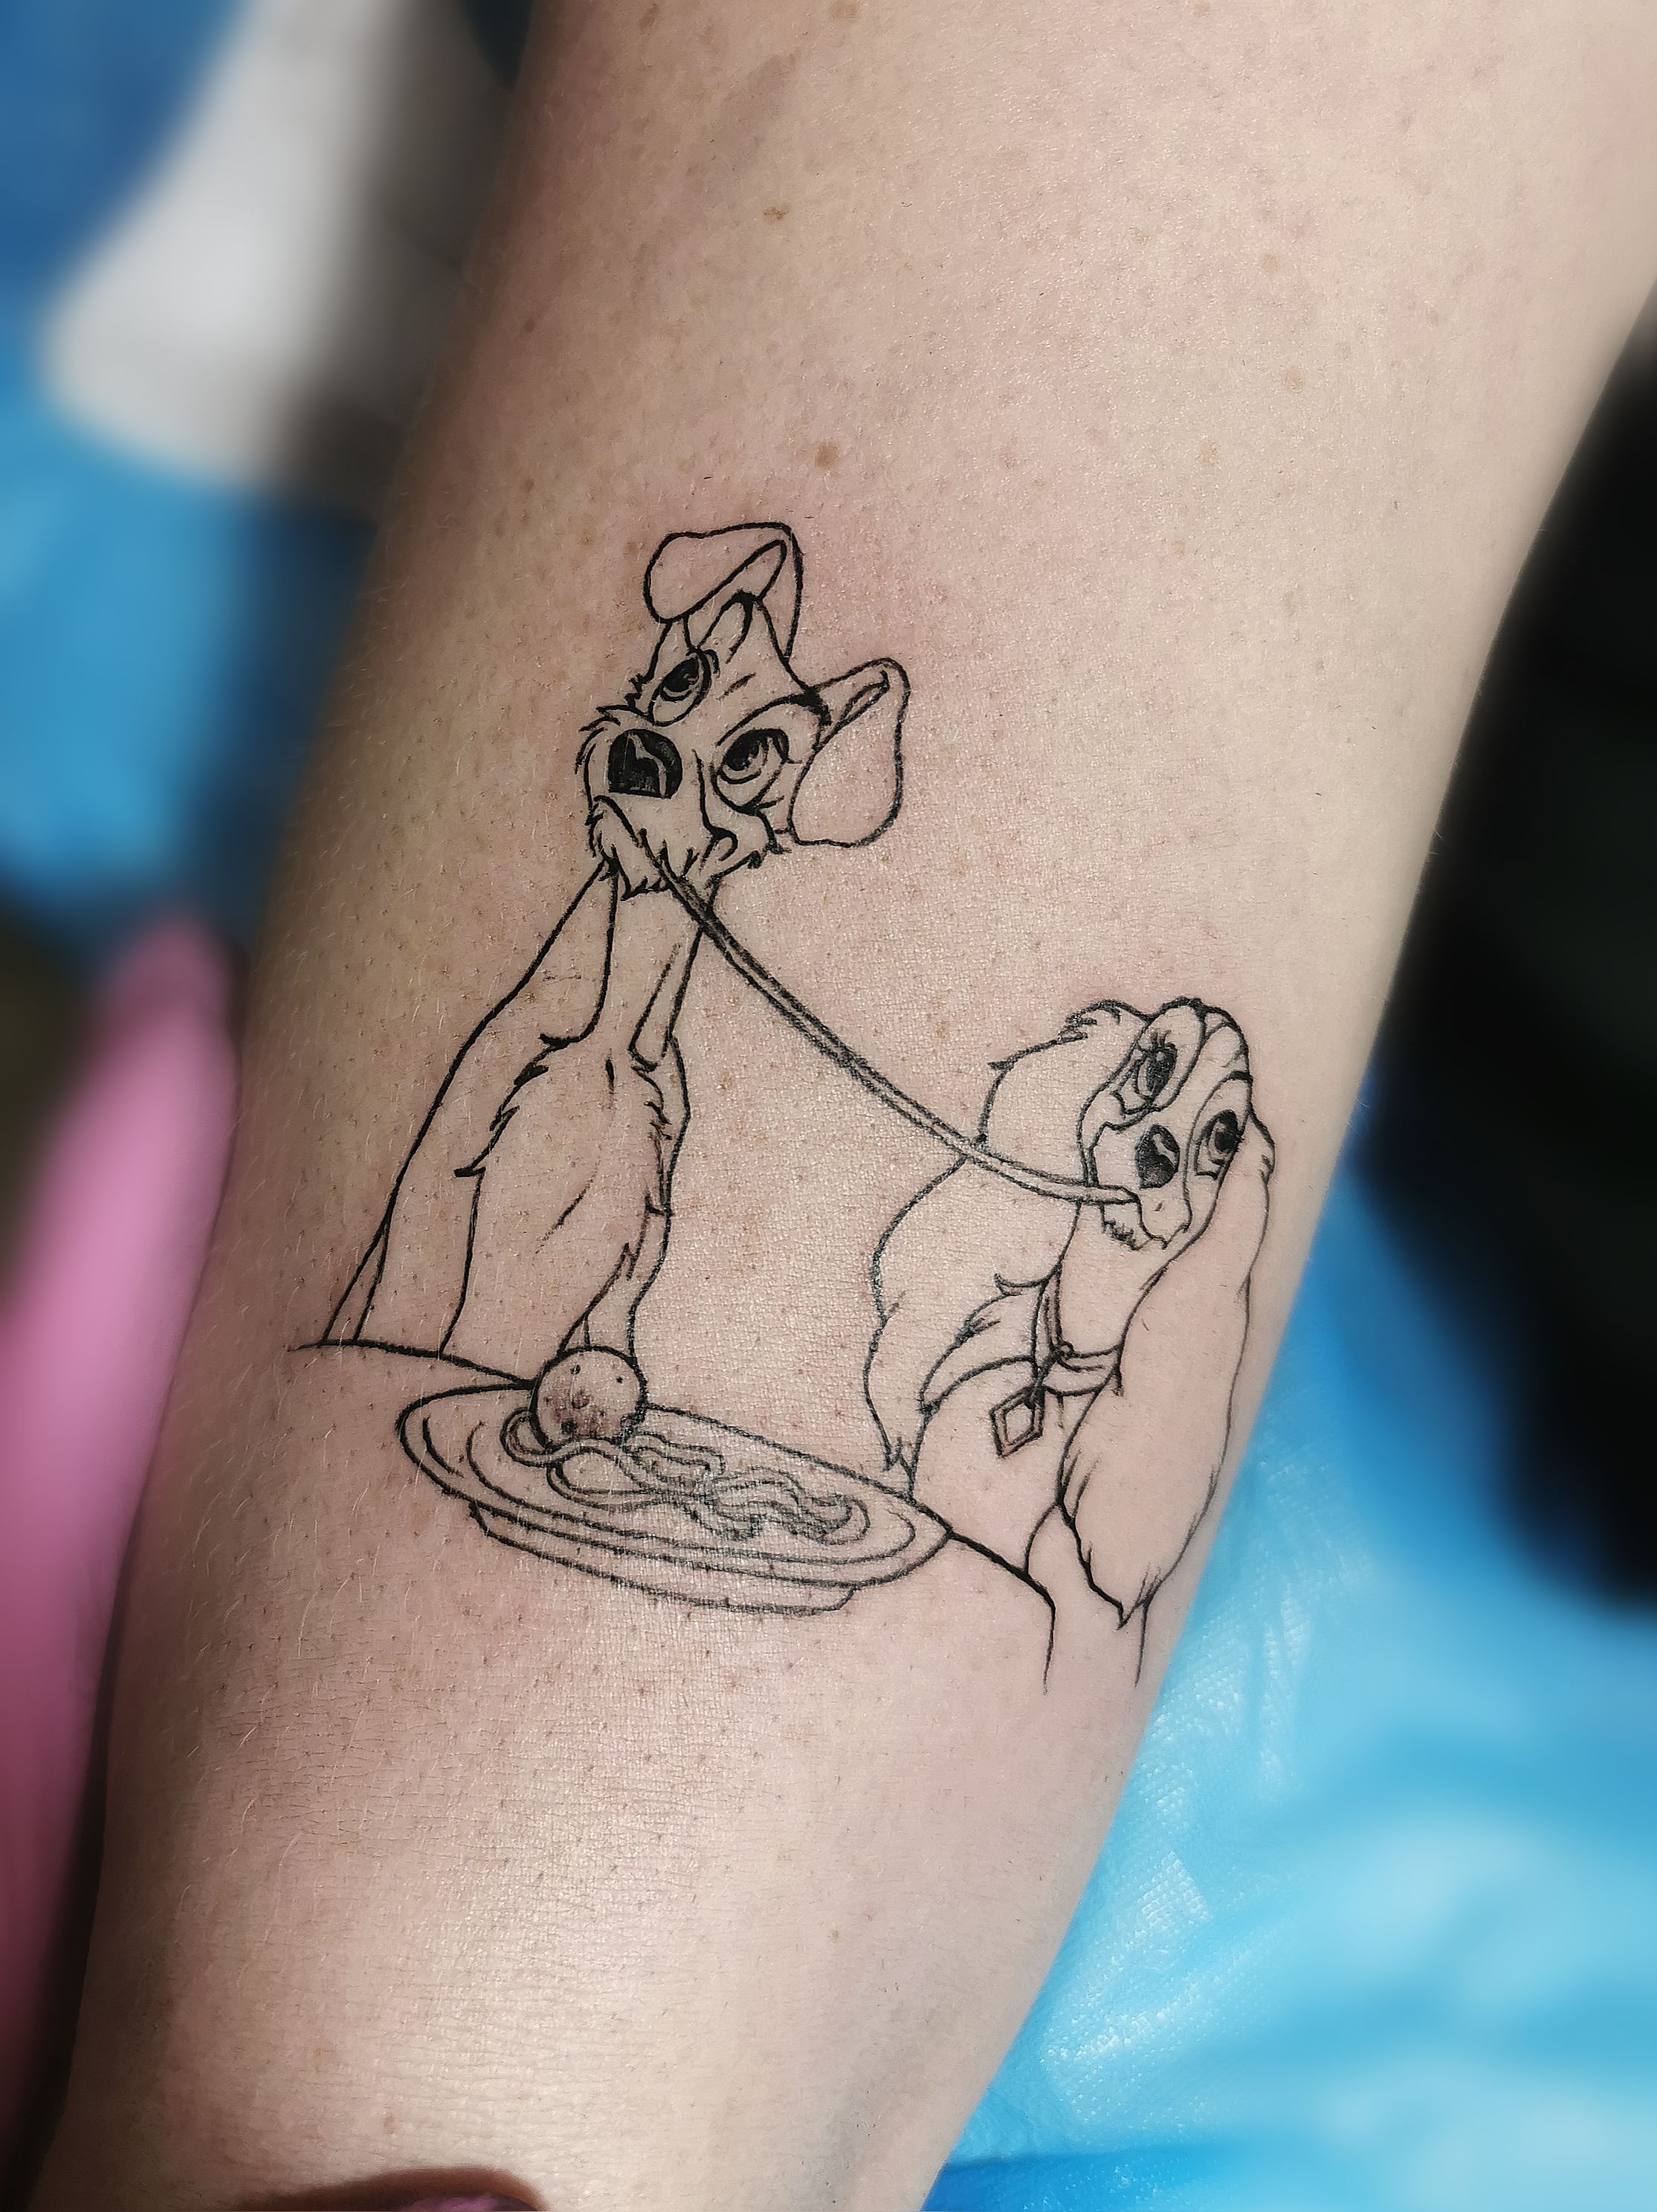 Adorable matching Lady and the Tramp tattoos by Chris Curtis 12ozstudios  team12oz tattoo tattoos tattooed tattoo  Family tattoos Matching  tattoos Tattoos